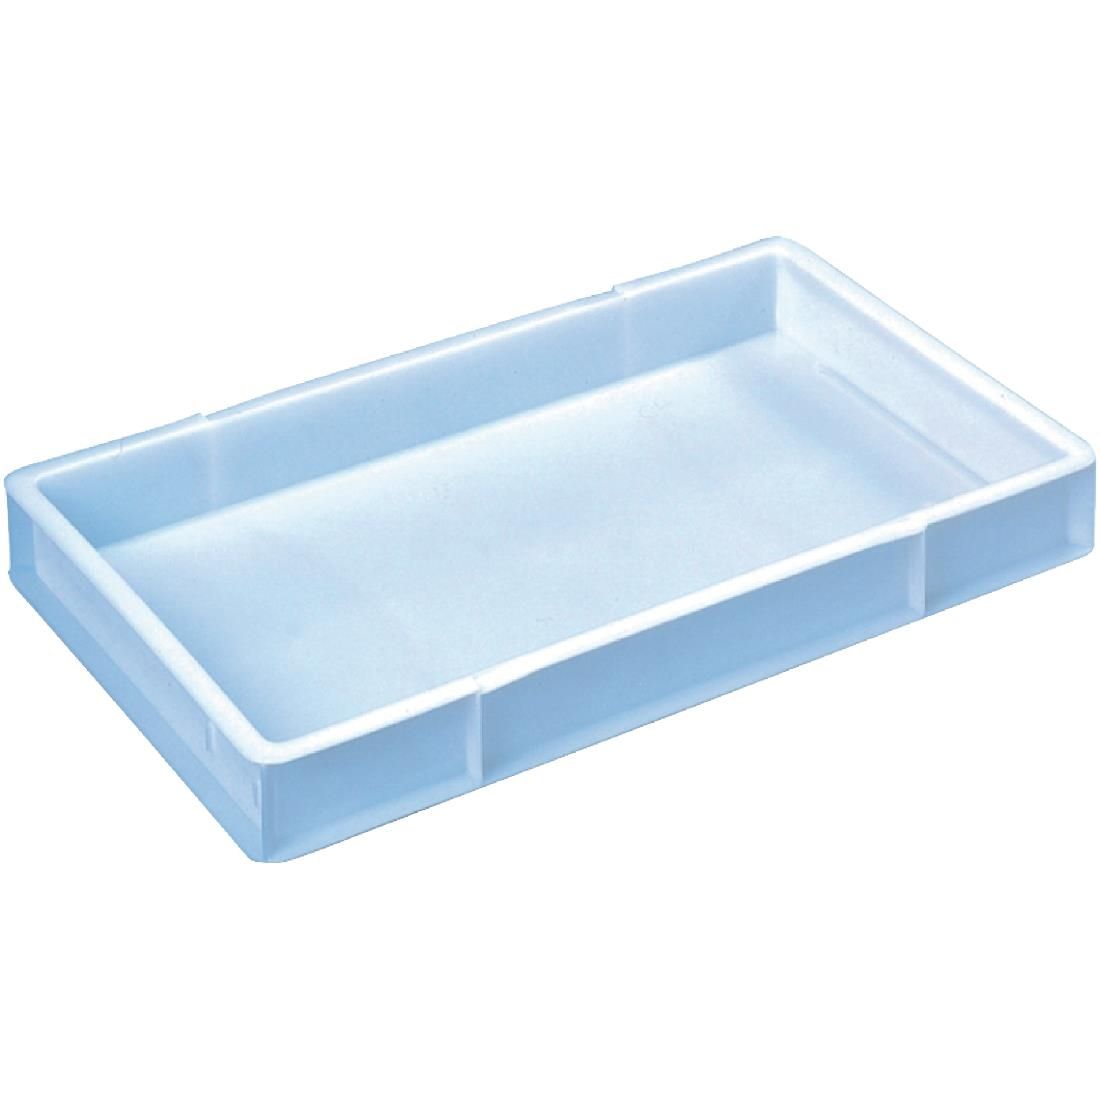 Confectionery Tray 22Ltr JD Catering Equipment Solutions Ltd